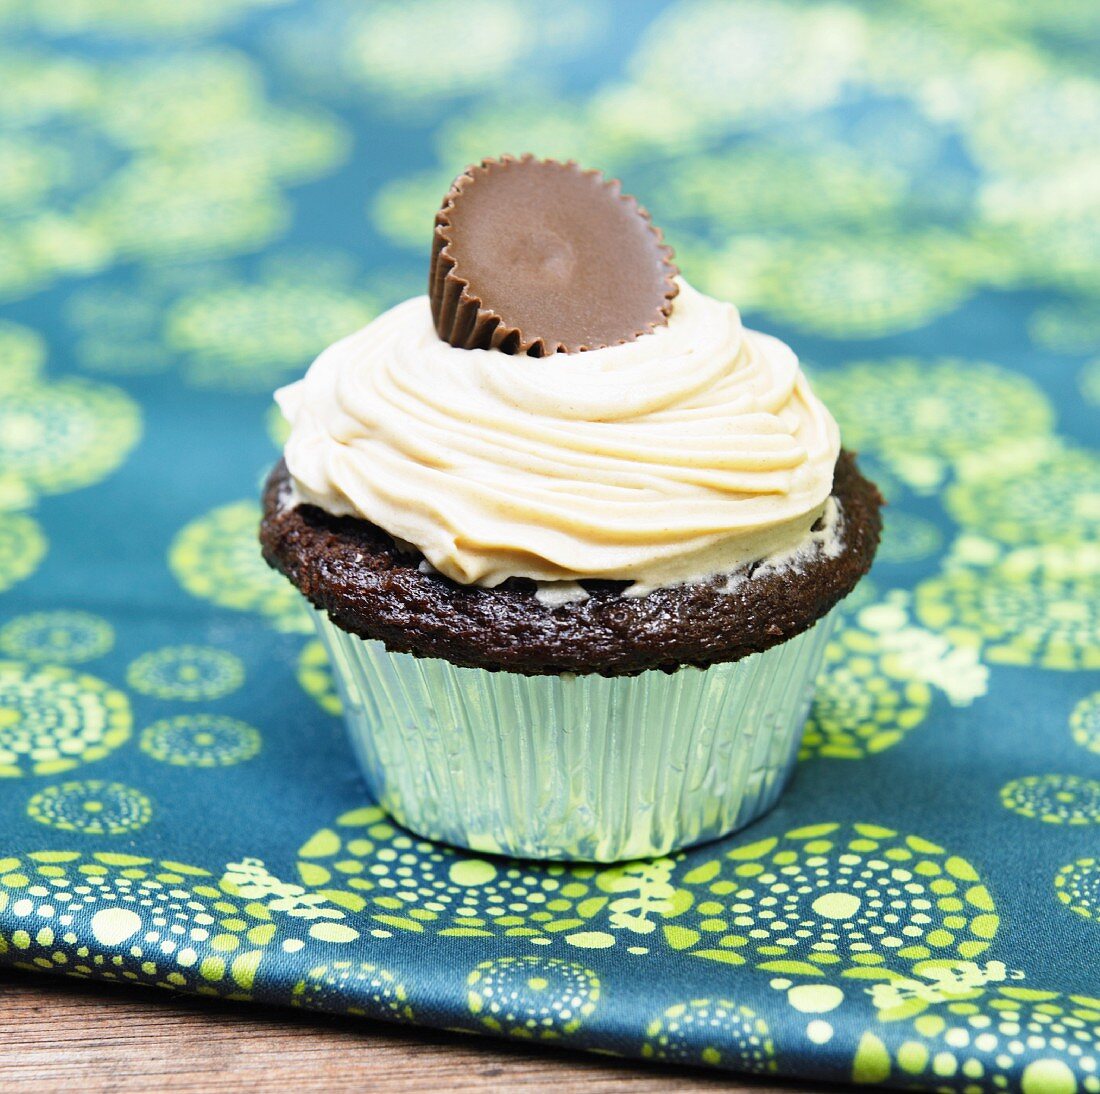 Chocolate Cupcake with Peanut Butter Frosting and a Peanut Butter Filled Chocolate Candy on Top